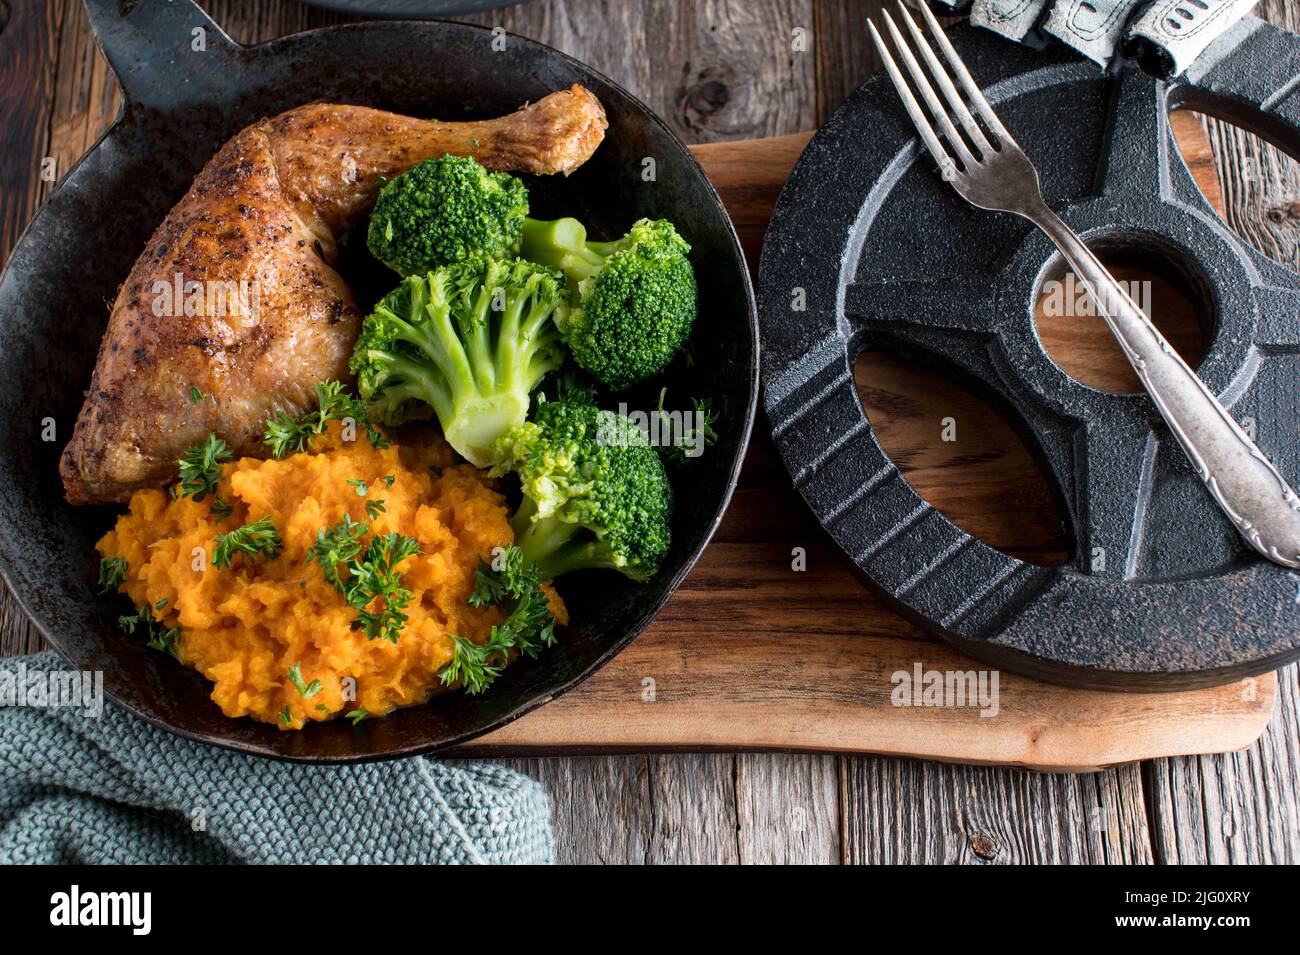 Fitness meal with roasted chicken leg, pumpkin puree and broccoli Stock Photo